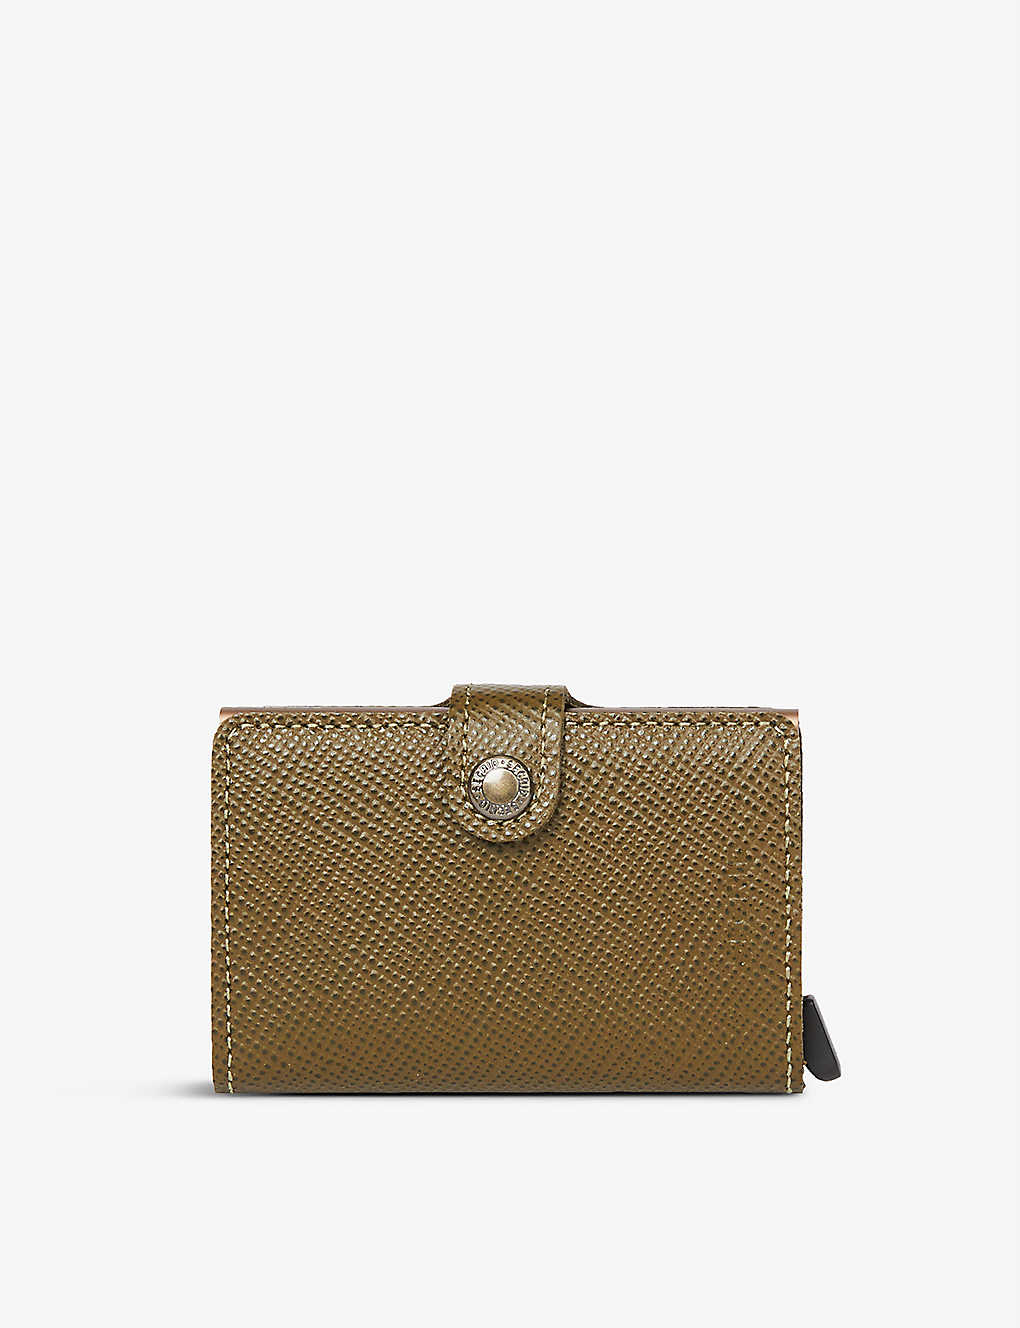 Secrid Miniwallet Leather And Aluminium Wallet In Olive